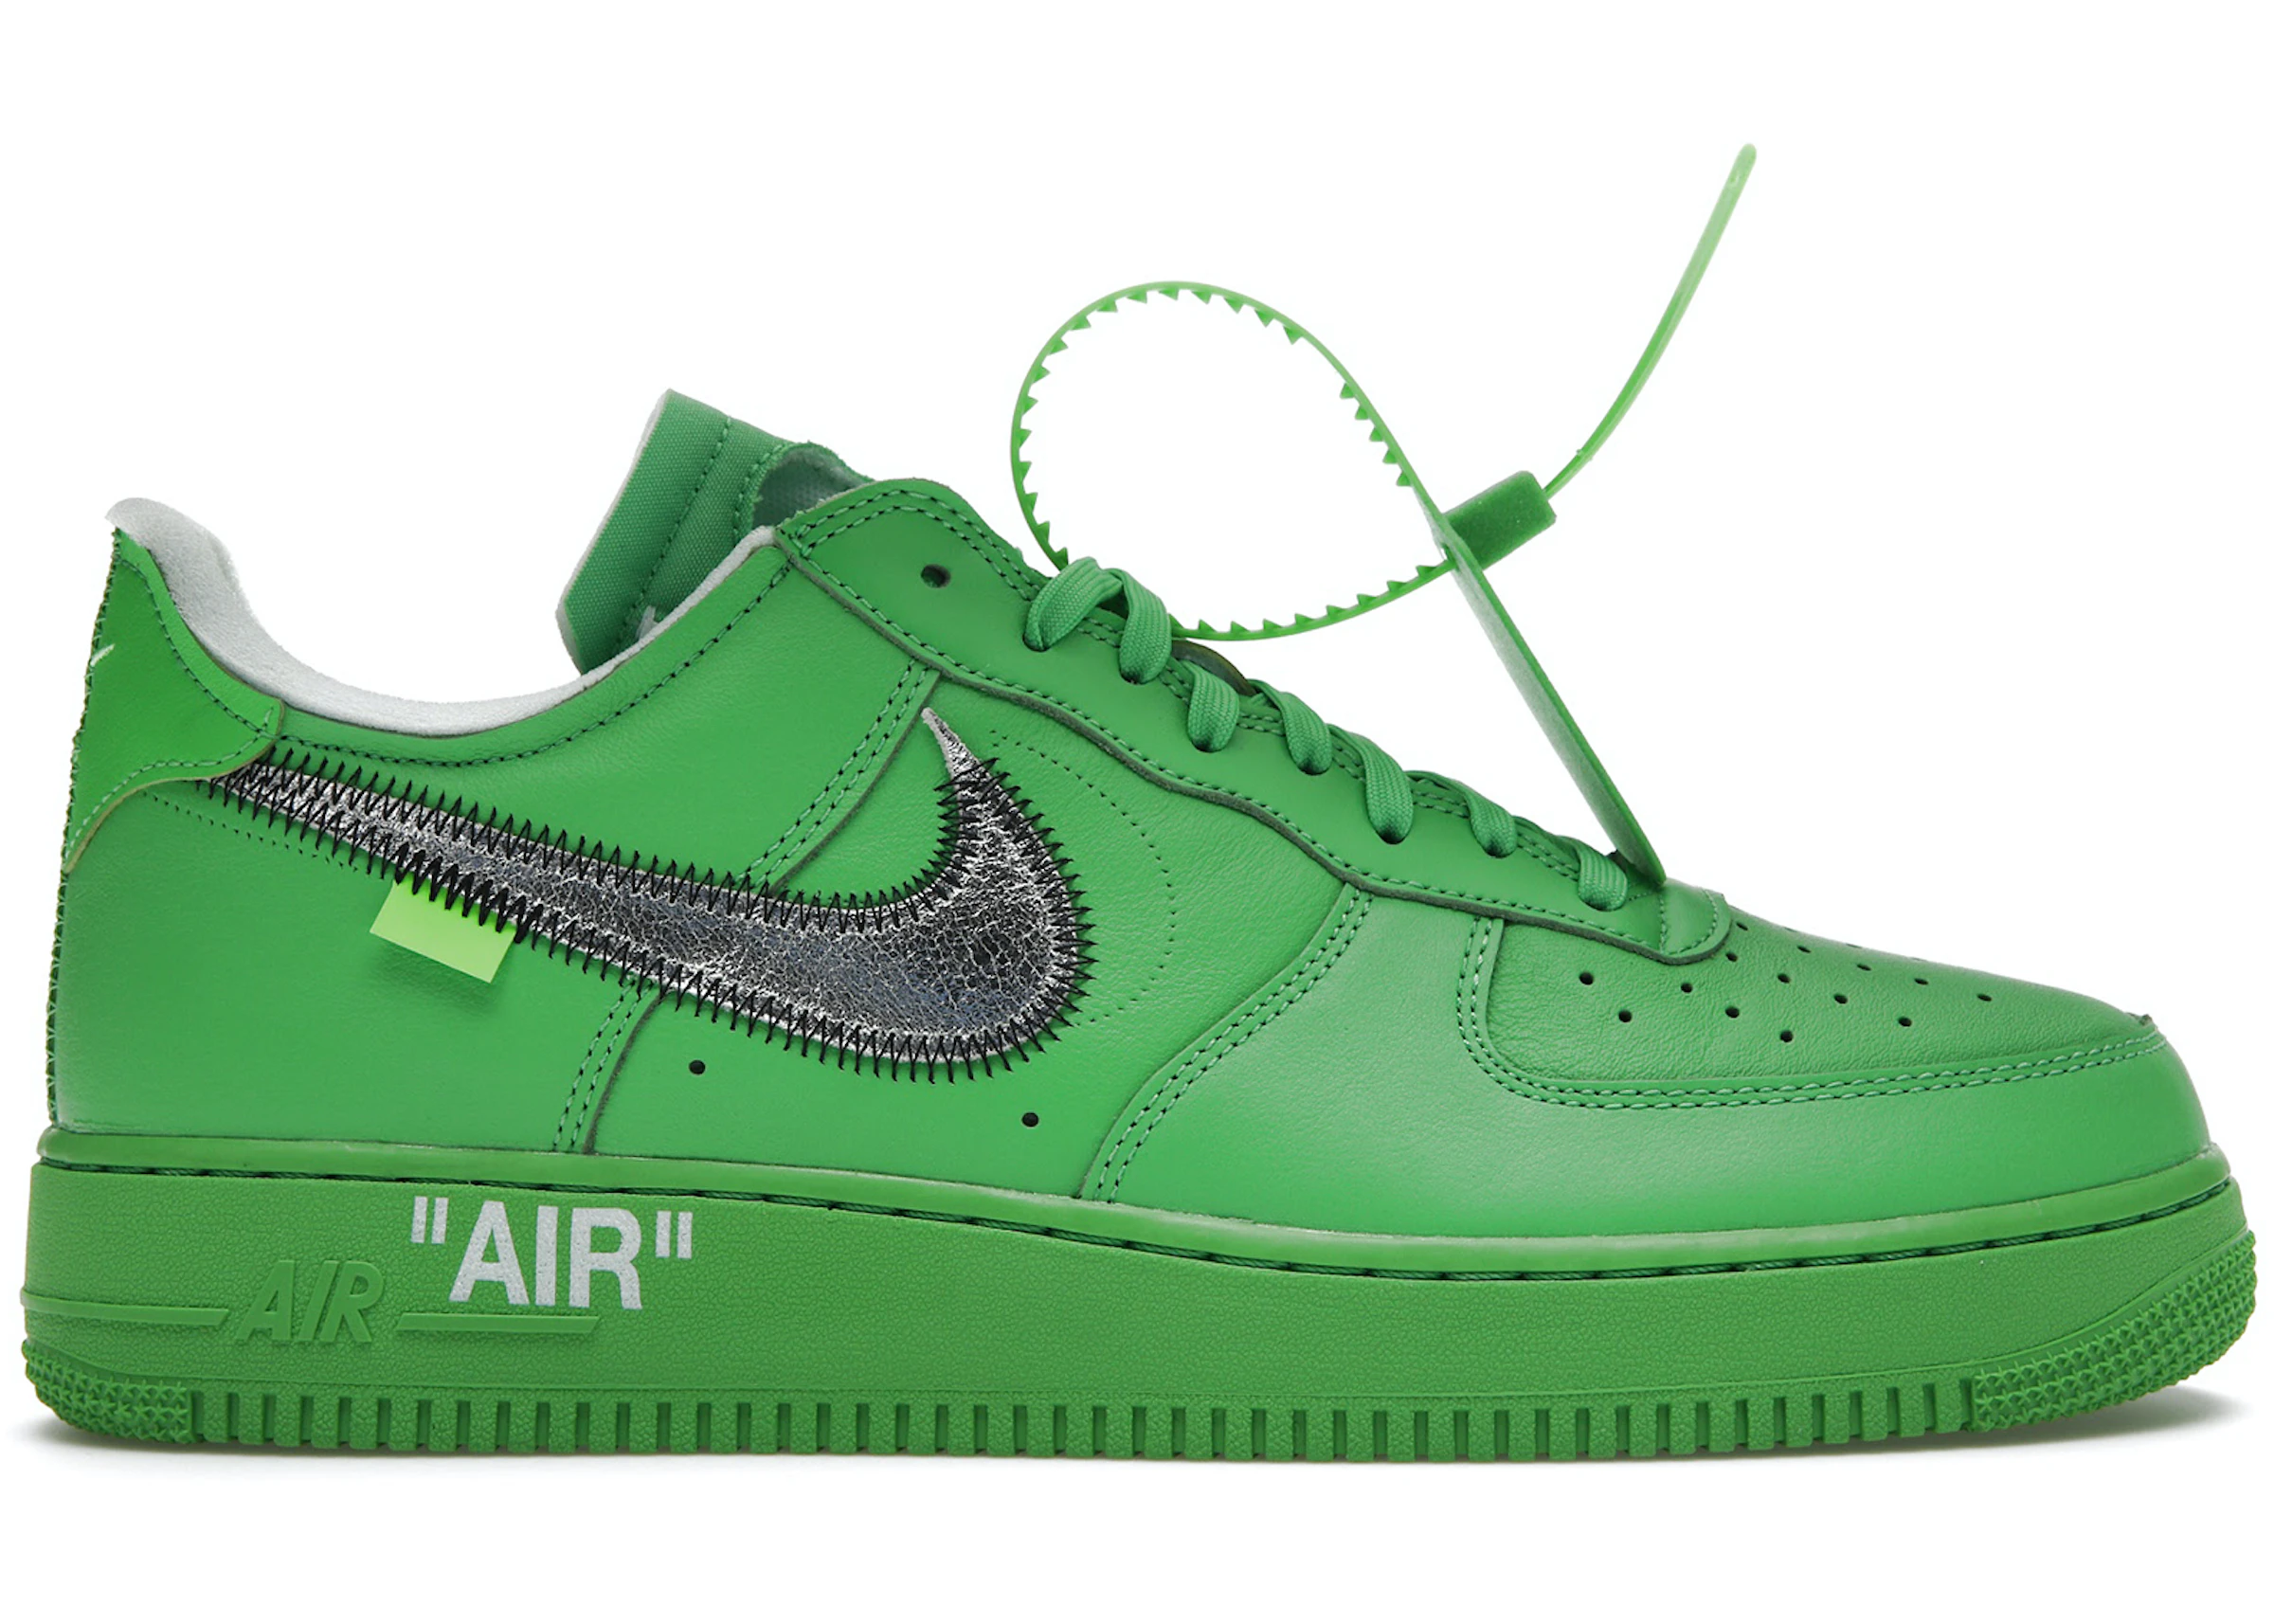 Buy Nike Shoes nike air force 1 olive green & New Sneakers - StockX